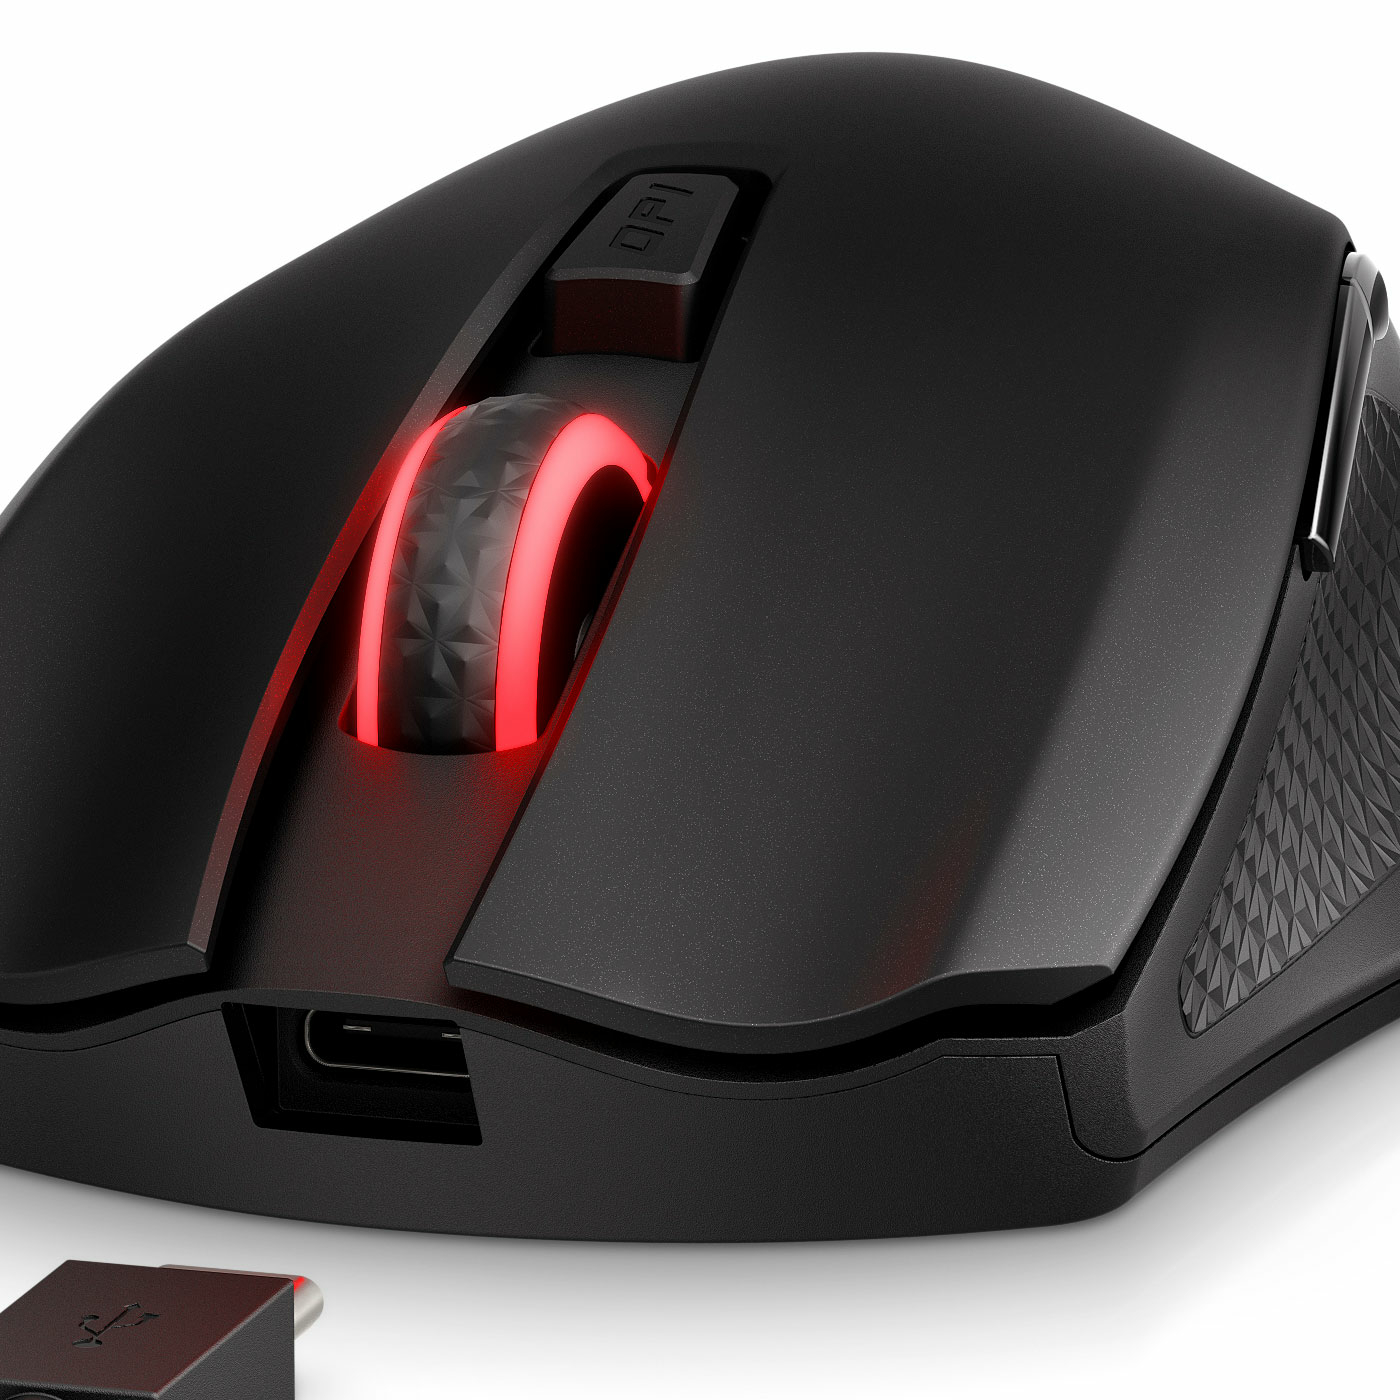 Mouse HP Inalámbrico Omen Vector Gaming Negro